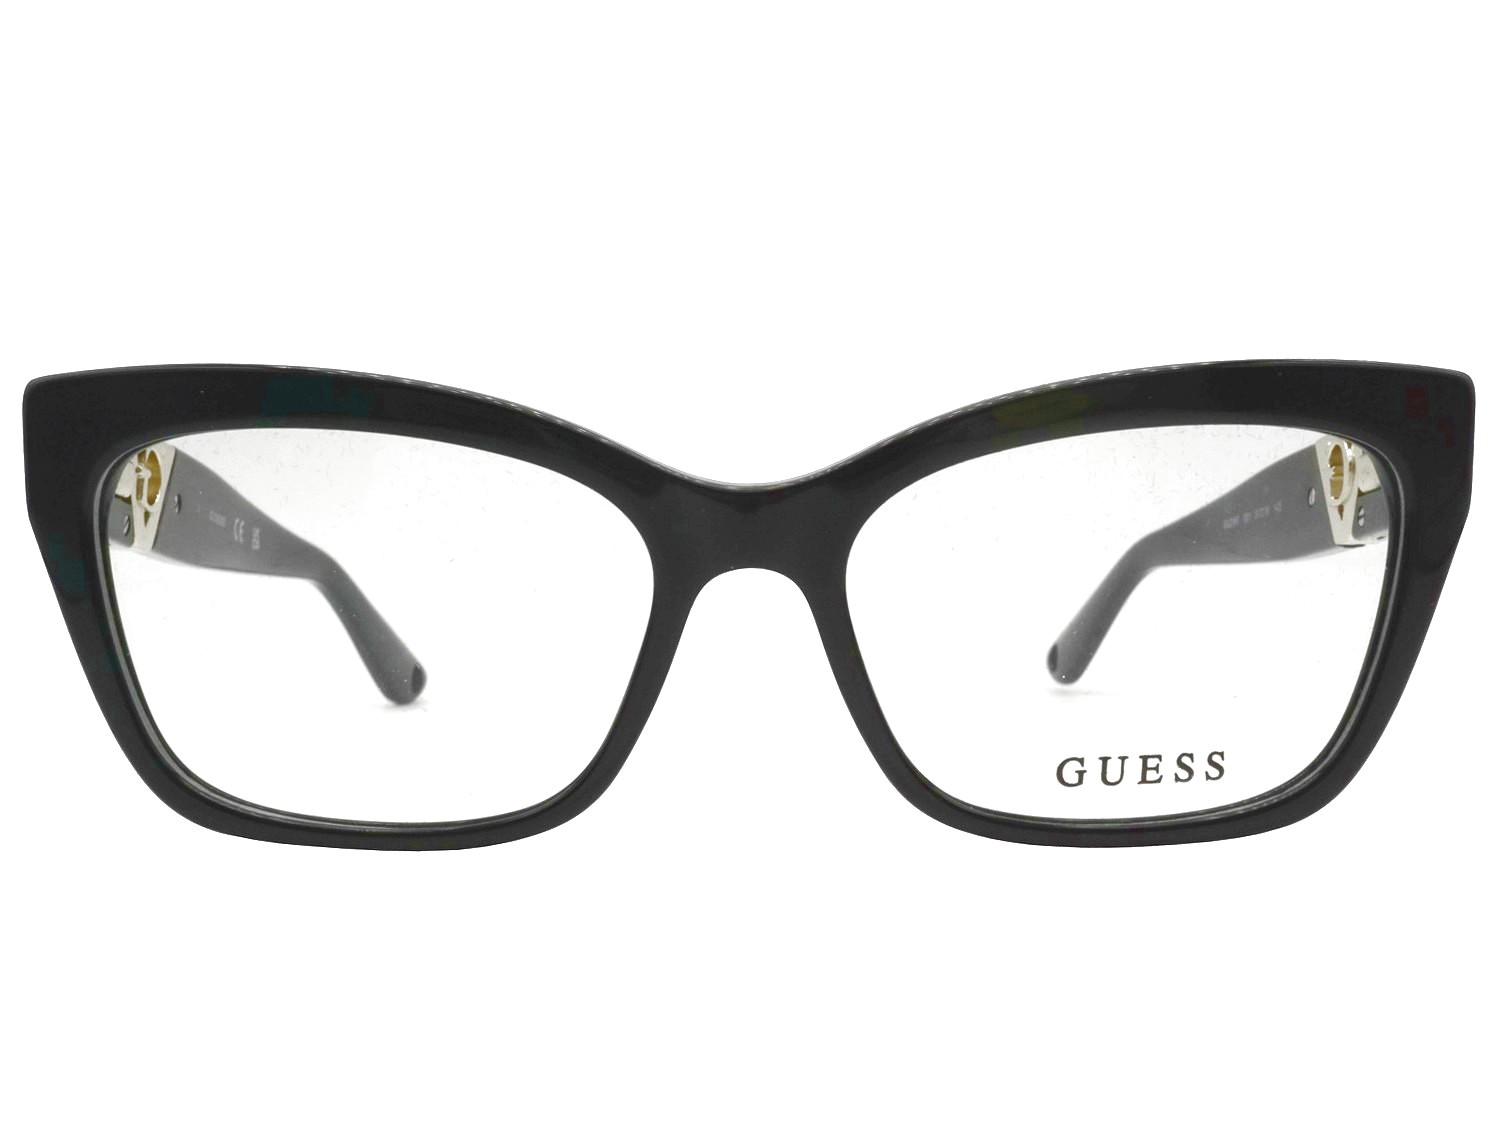 Guess 2960 001